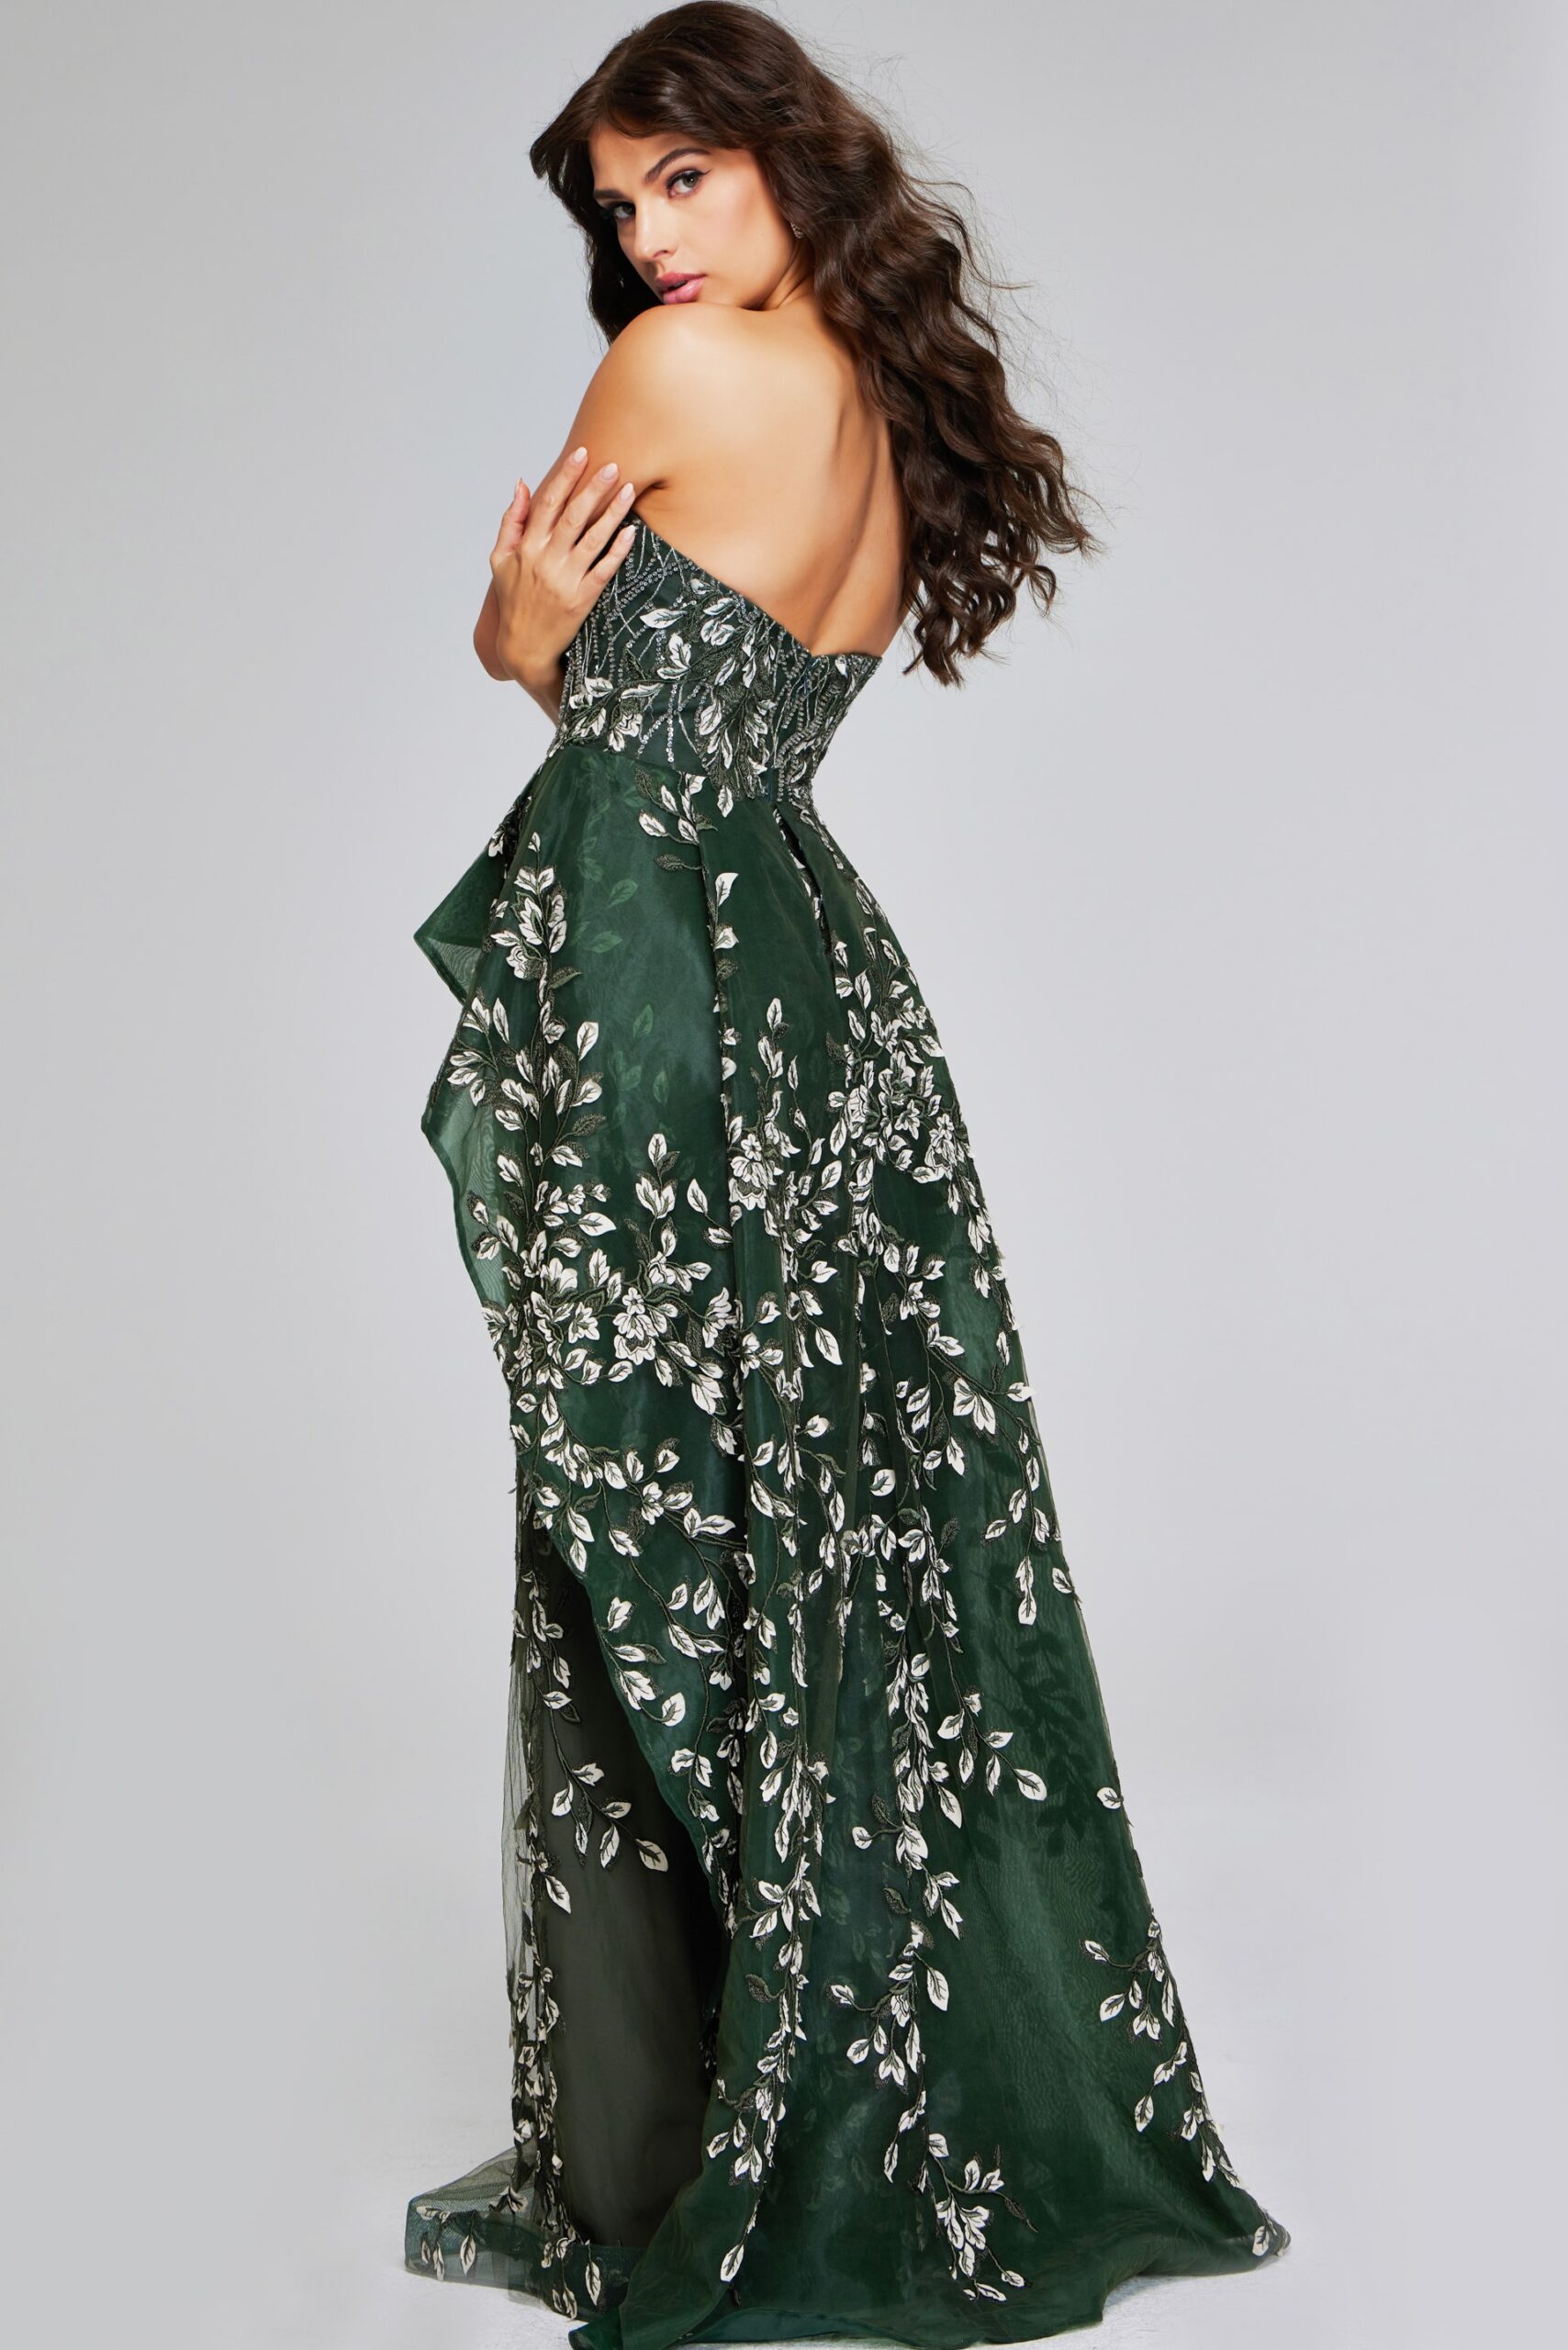 Dark Green Strapless Gown with Embroidered Floral Design 37599